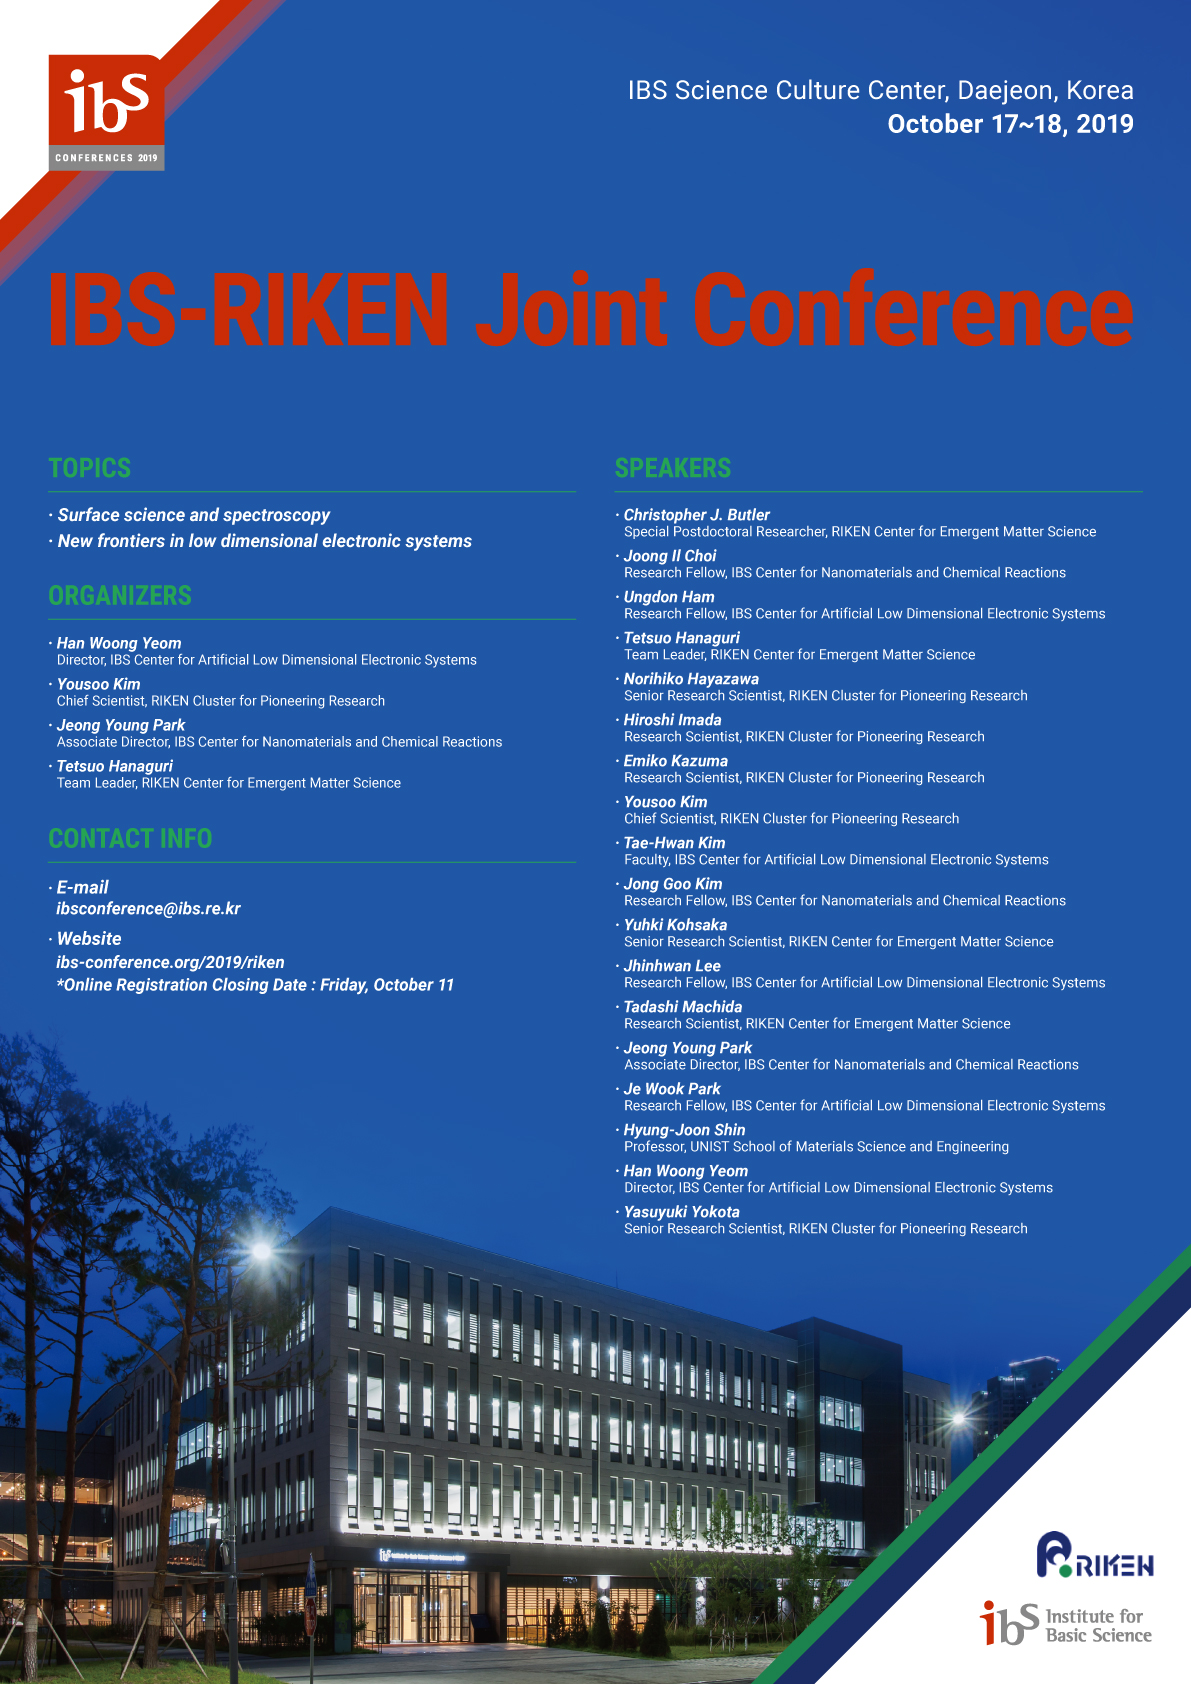 IBS-RIKEN Joint Conference